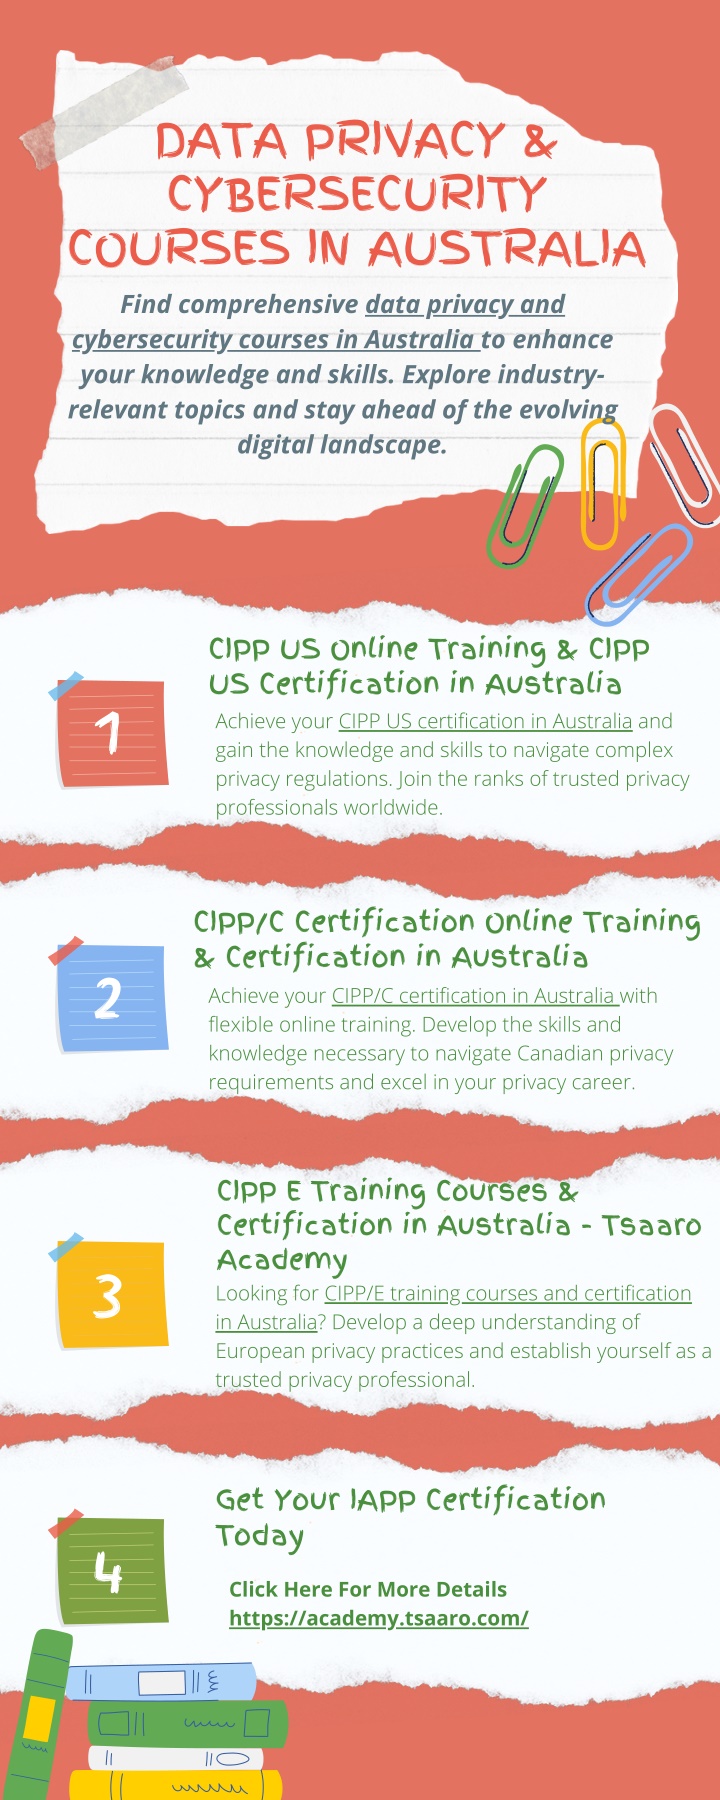 data privacy cybersecurity courses in australia